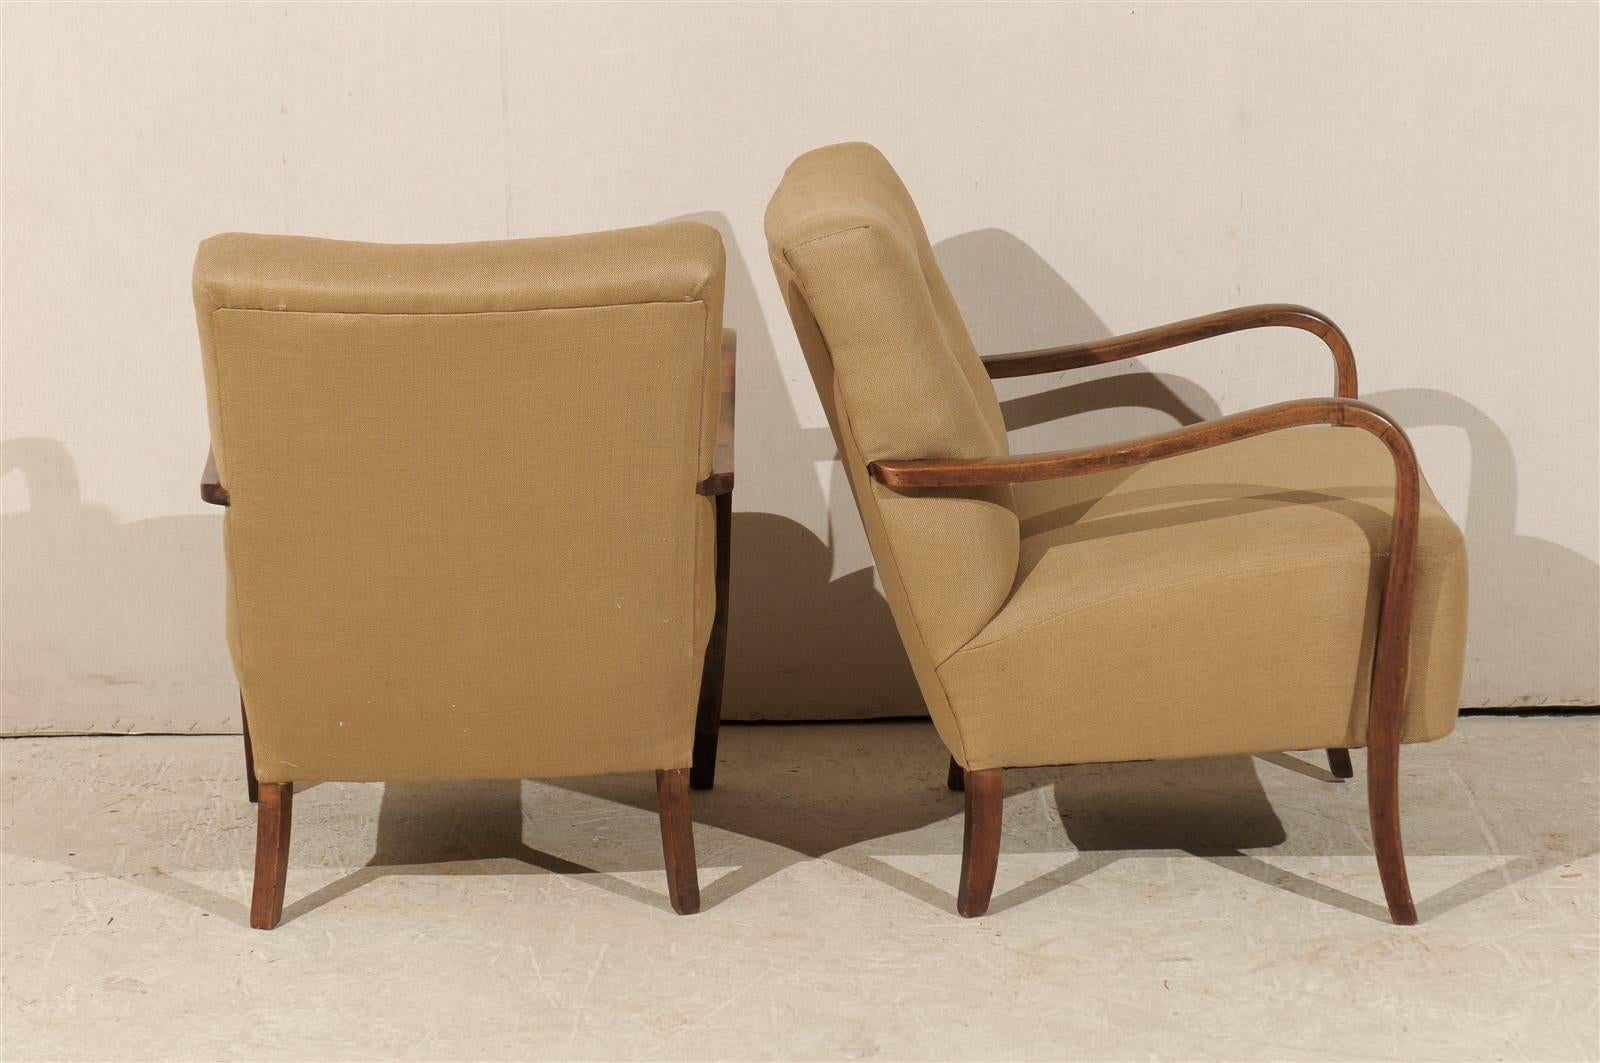 Pair of Swedish Art Deco Upholstered Armchairs 1